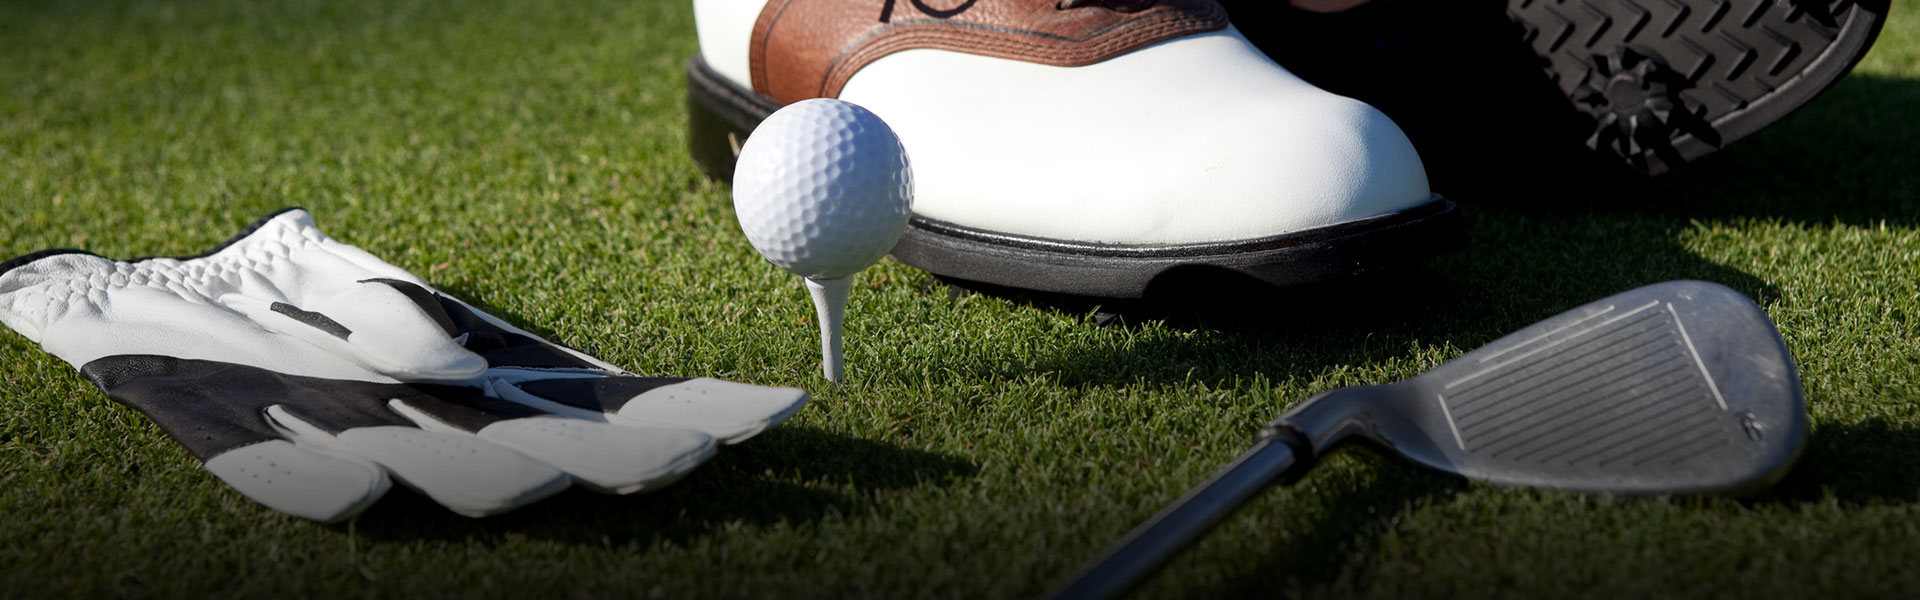 close up of a ball on a tee, golf club, and glove